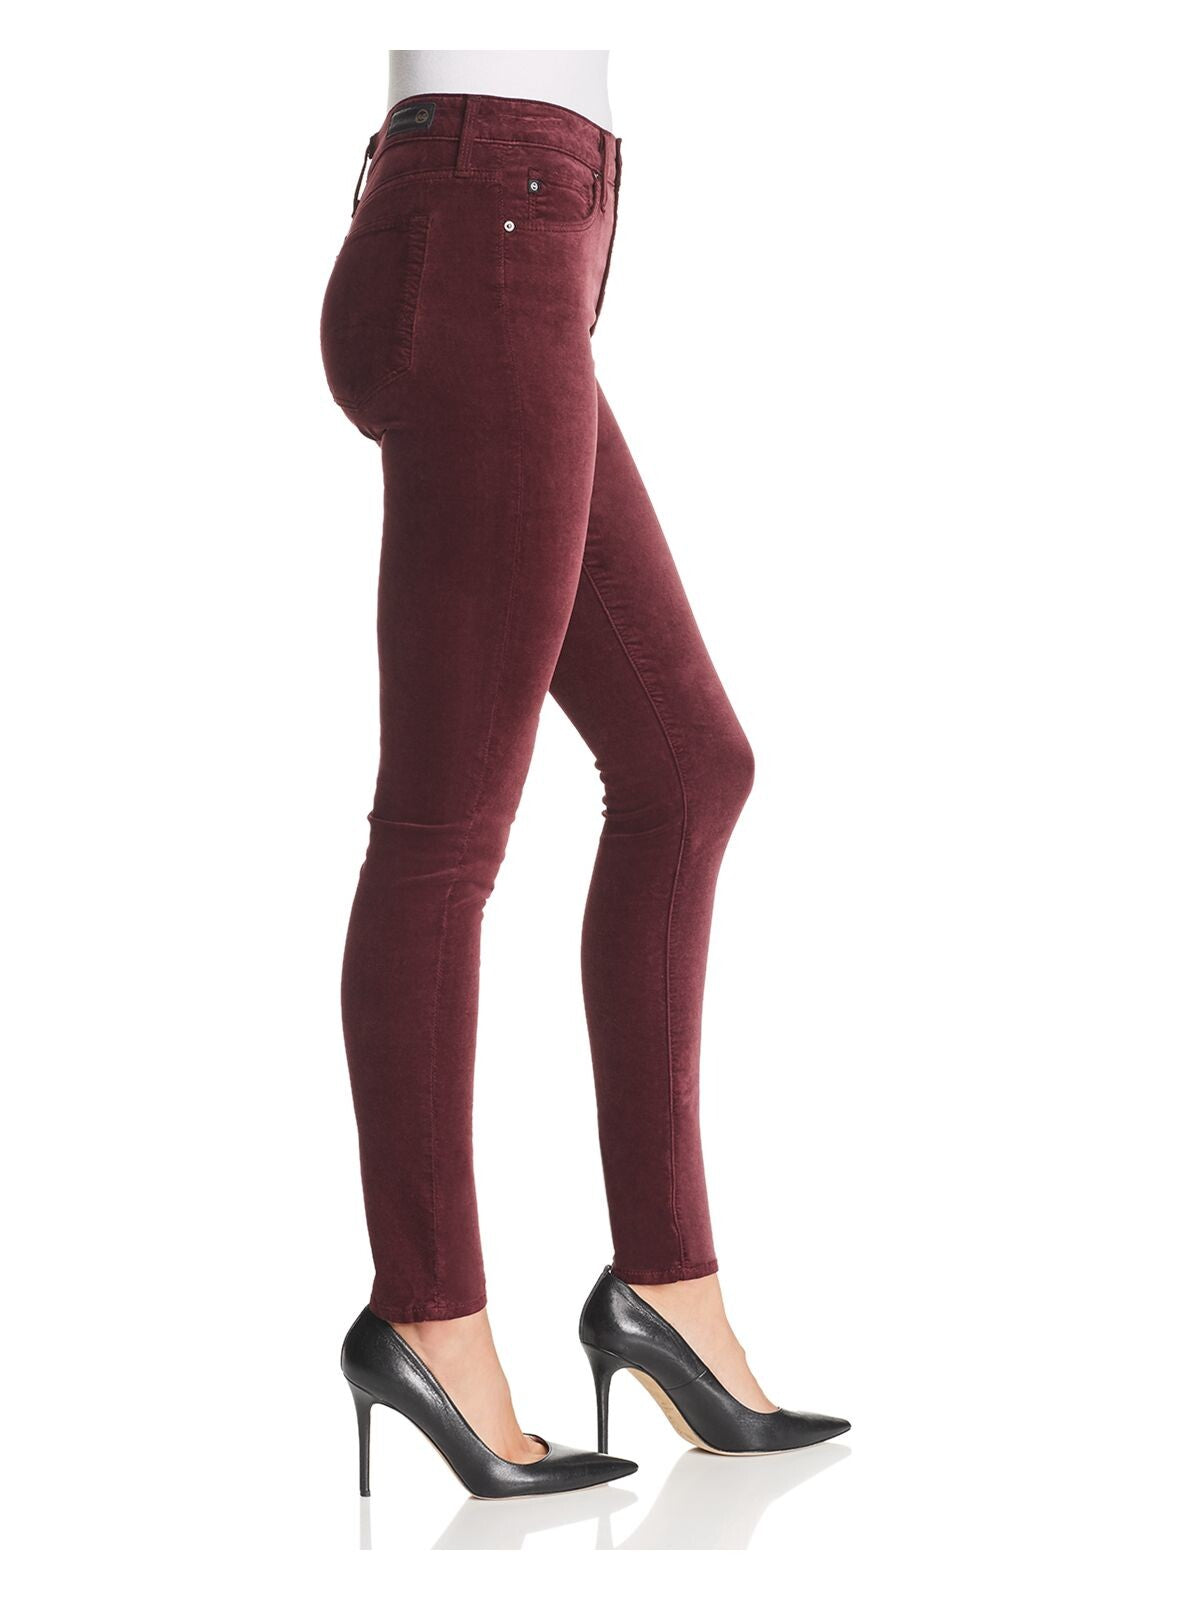 ADRIANO GOLDSCHMIED Womens Maroon Pocketed Zippered Skinny Jeans 25 R